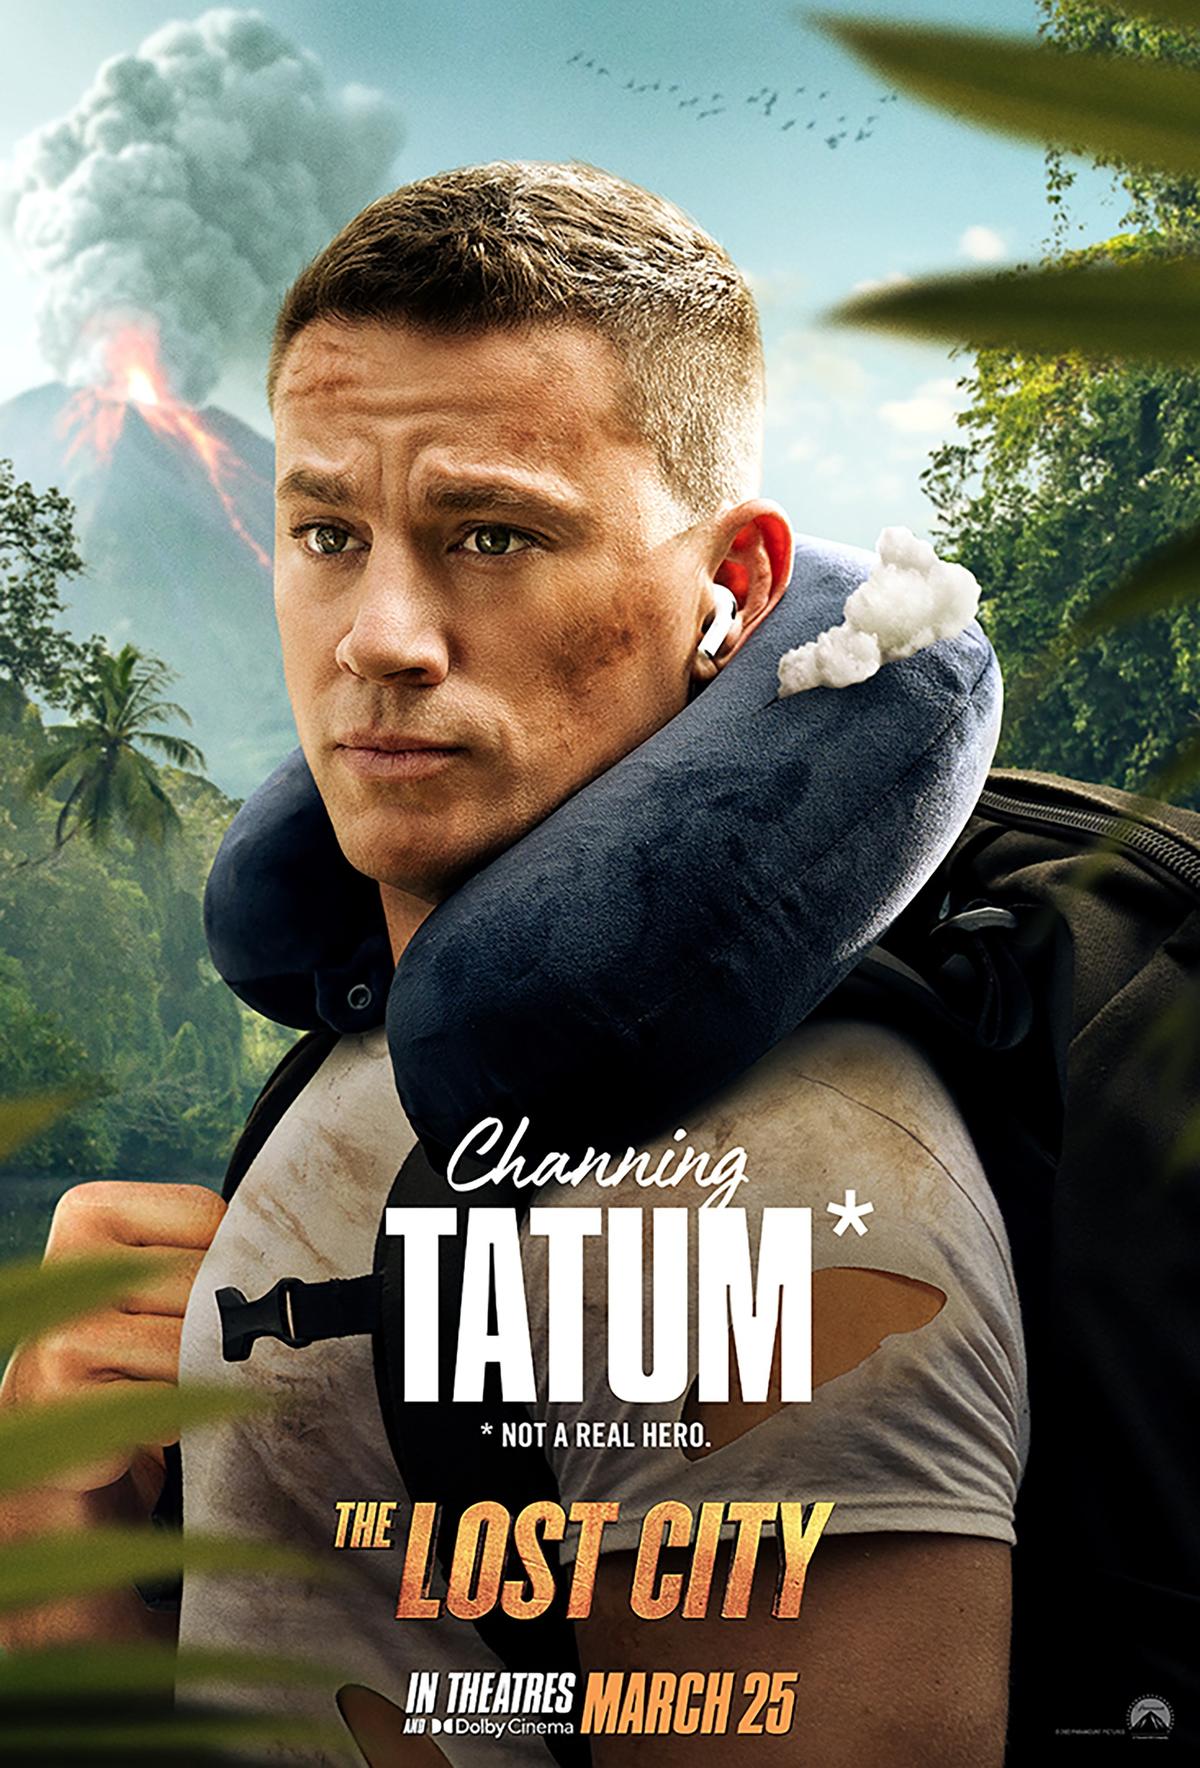 Alan (Channing Tatum), a romance novel cover model, in "The Lost City." (Paramount Pictures)